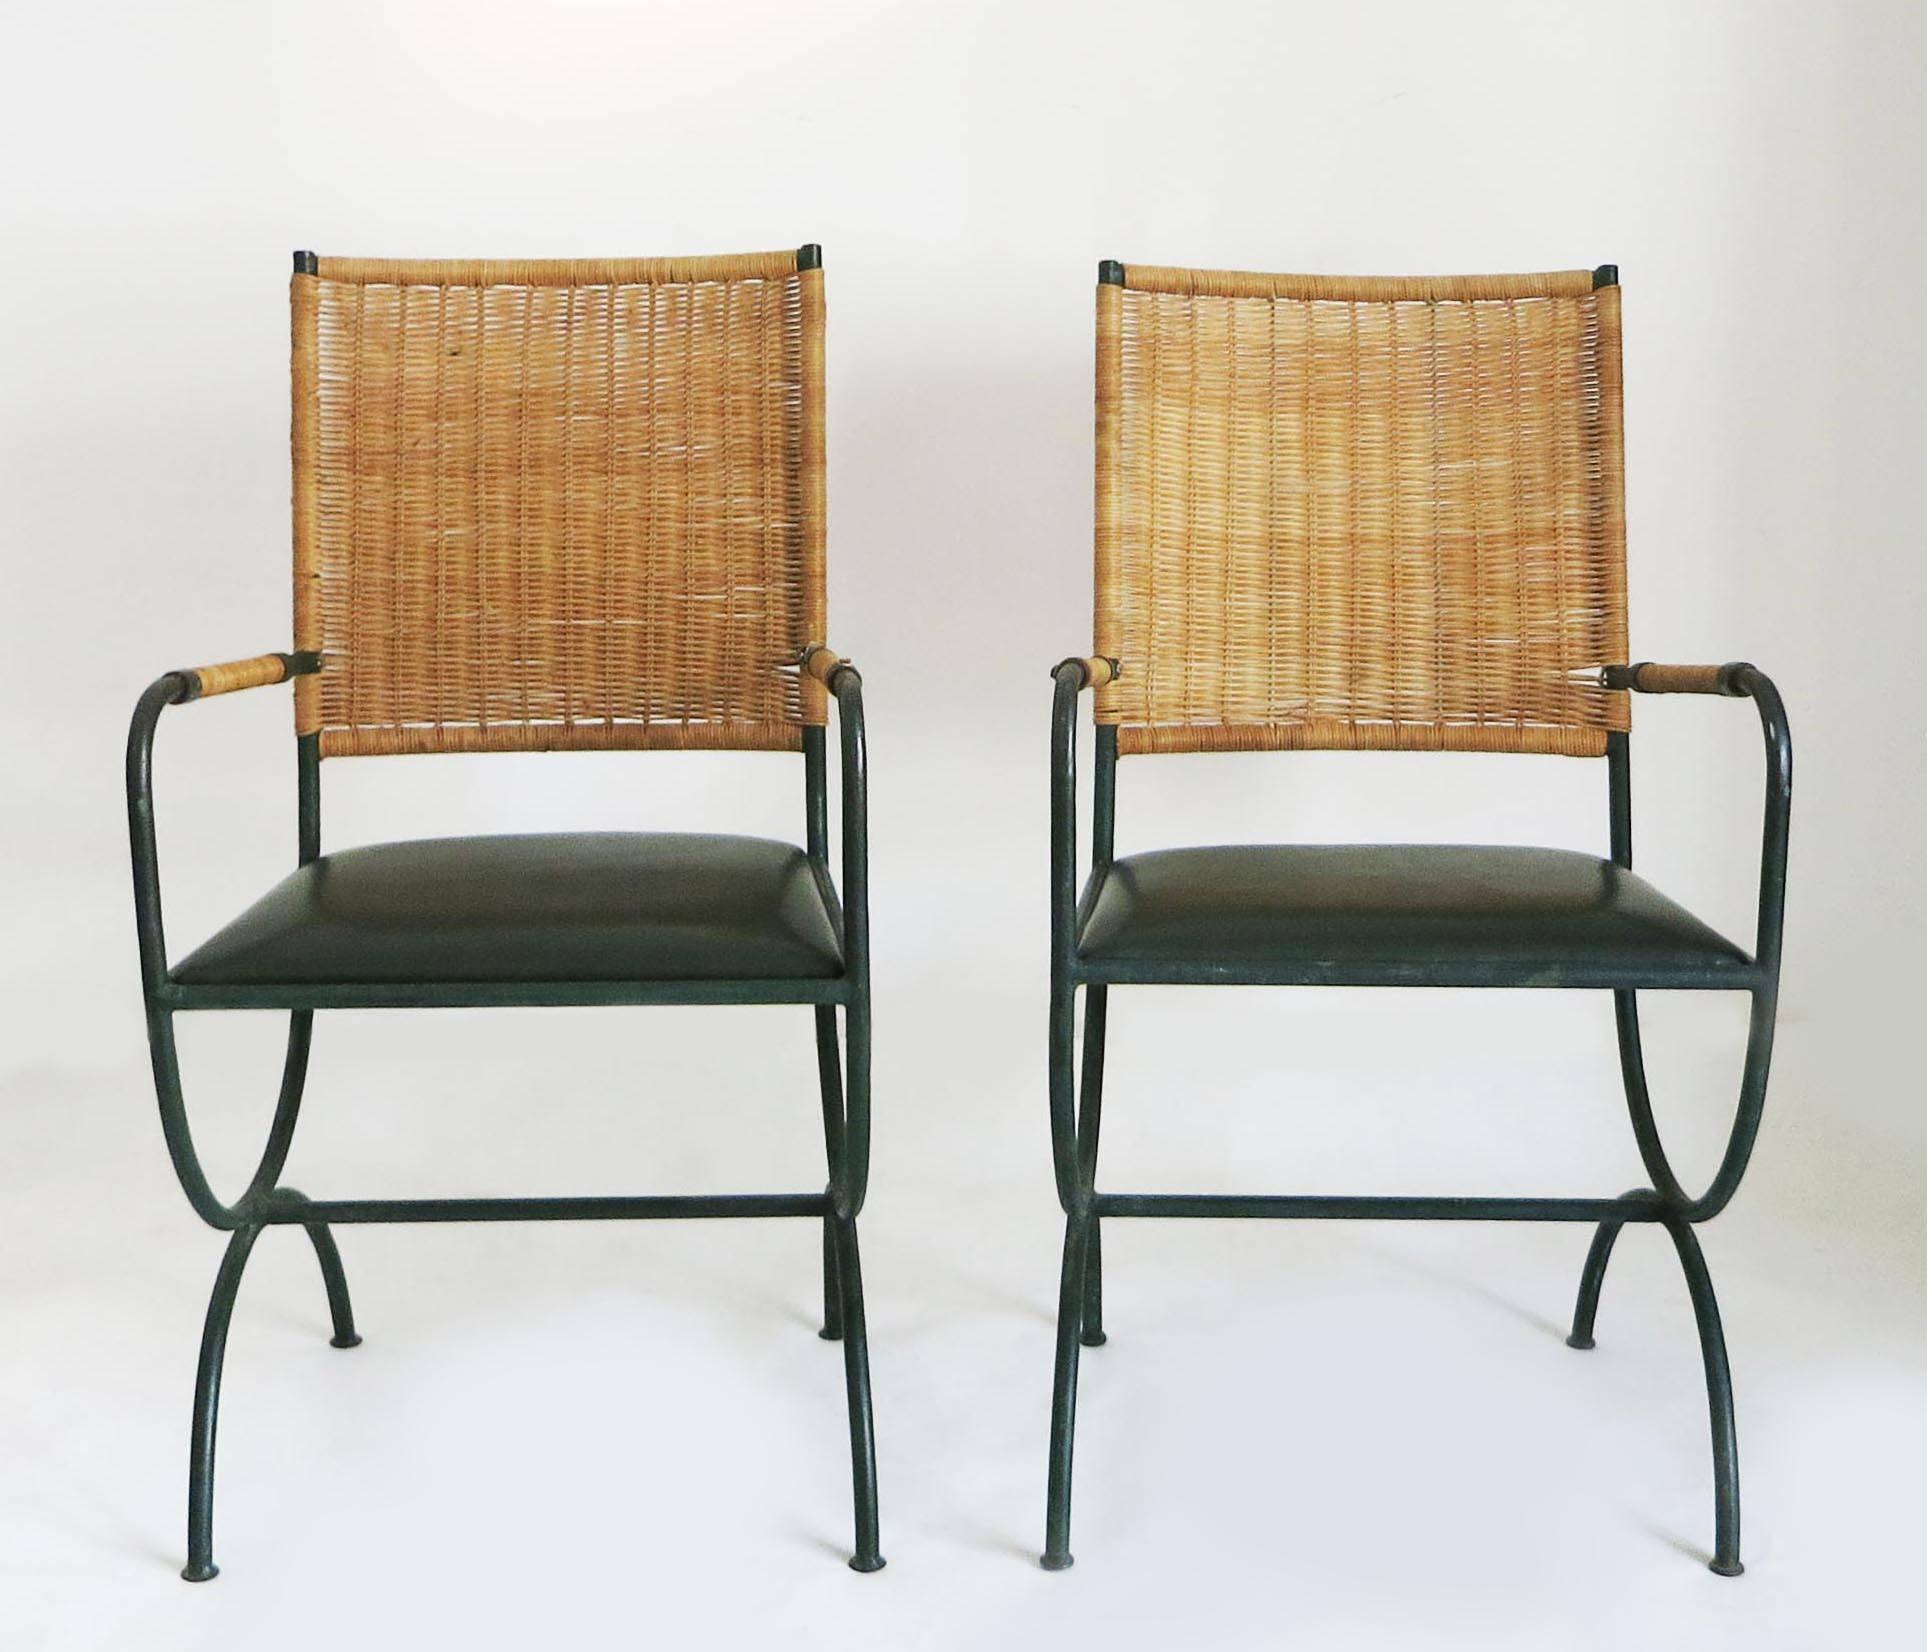 Pair of chairs by Jacques Adnet.
Back and arms in wicker and leather on a dark green iron frame.